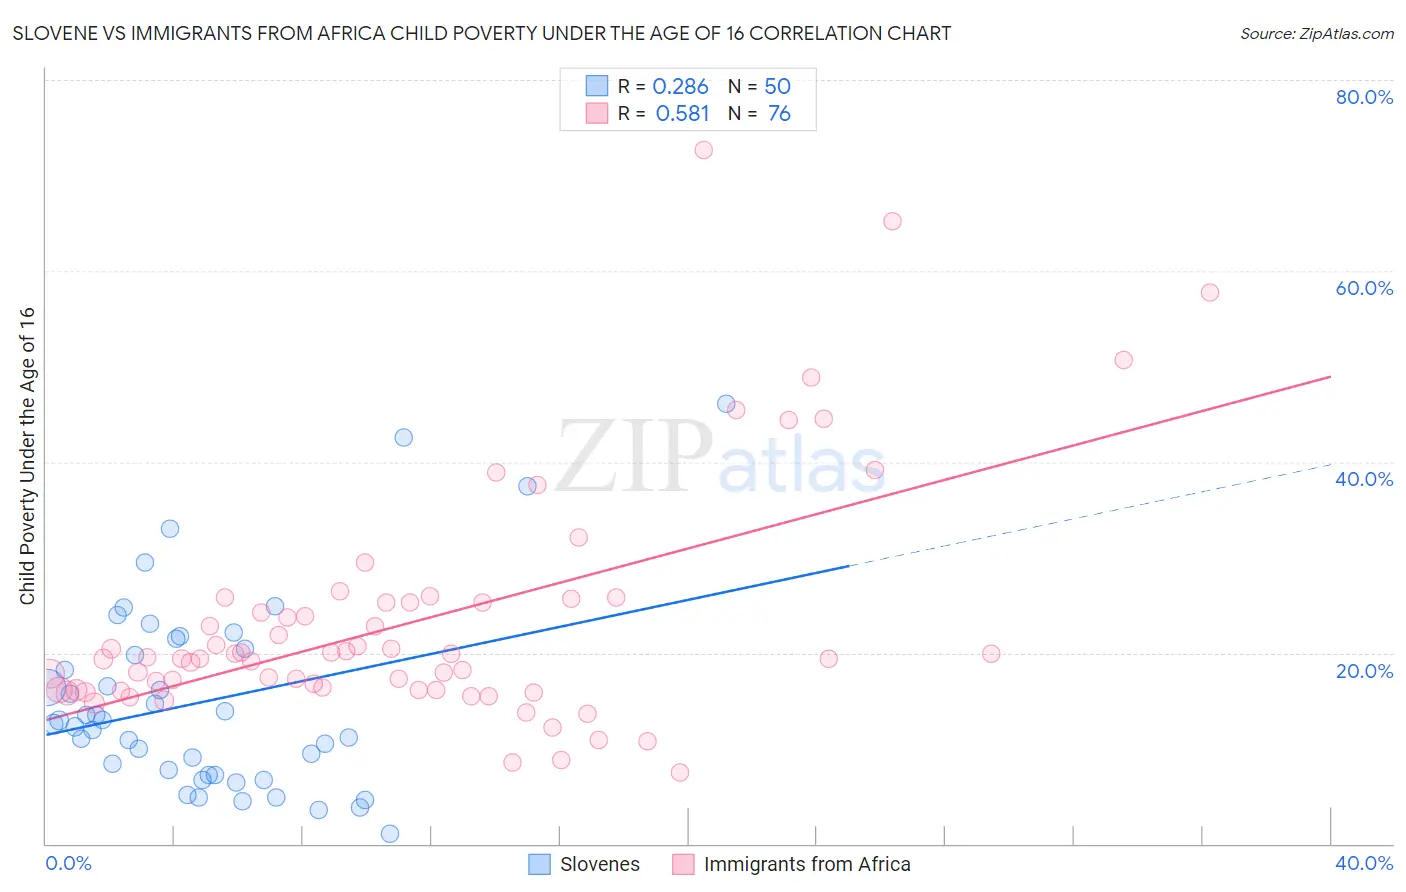 Slovene vs Immigrants from Africa Child Poverty Under the Age of 16